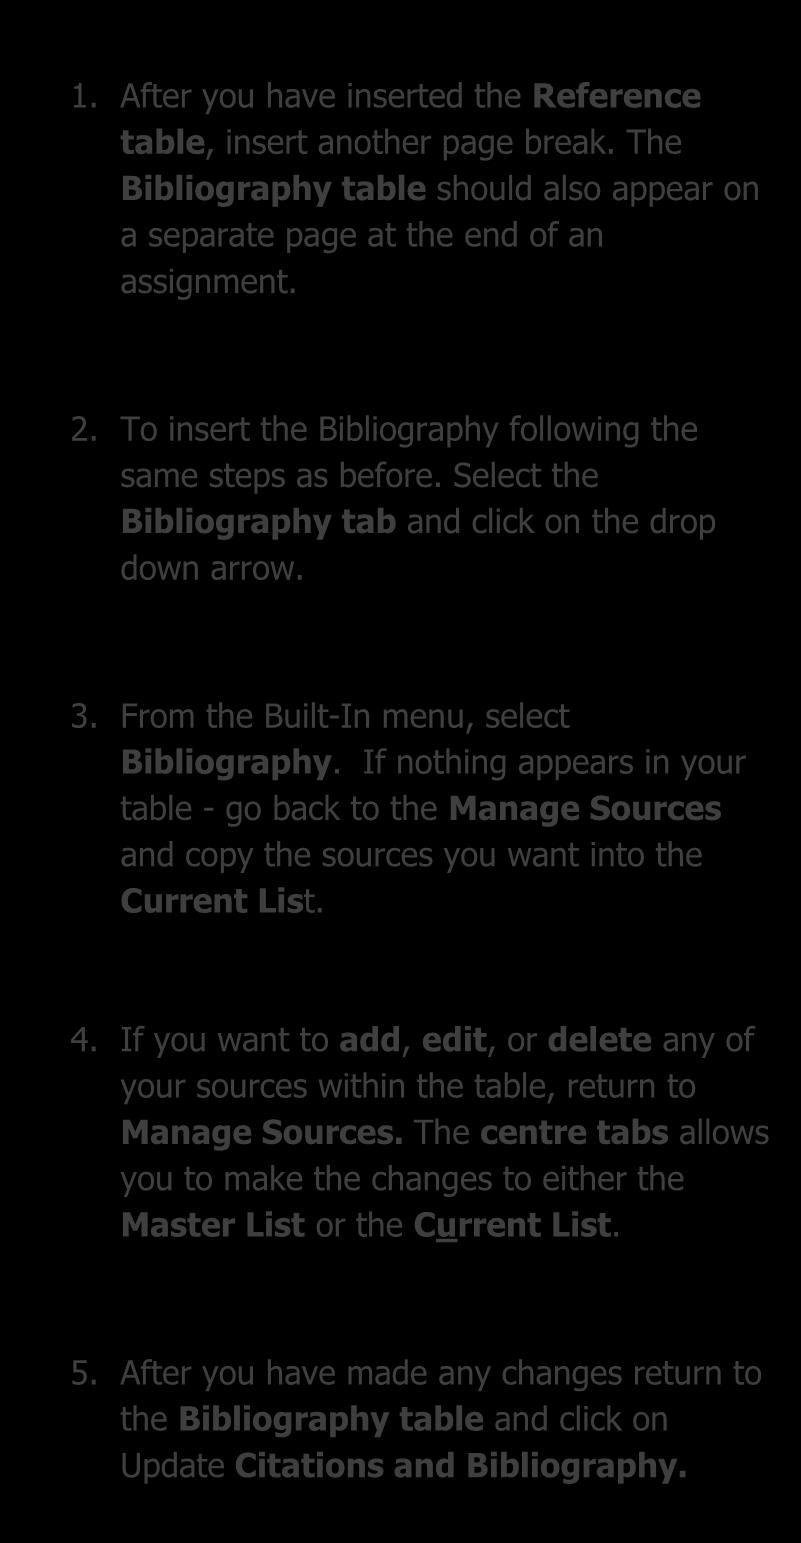 Inserting, editing and updating a Bibliography Table 1. After you have inserted the Reference table, insert another page break.